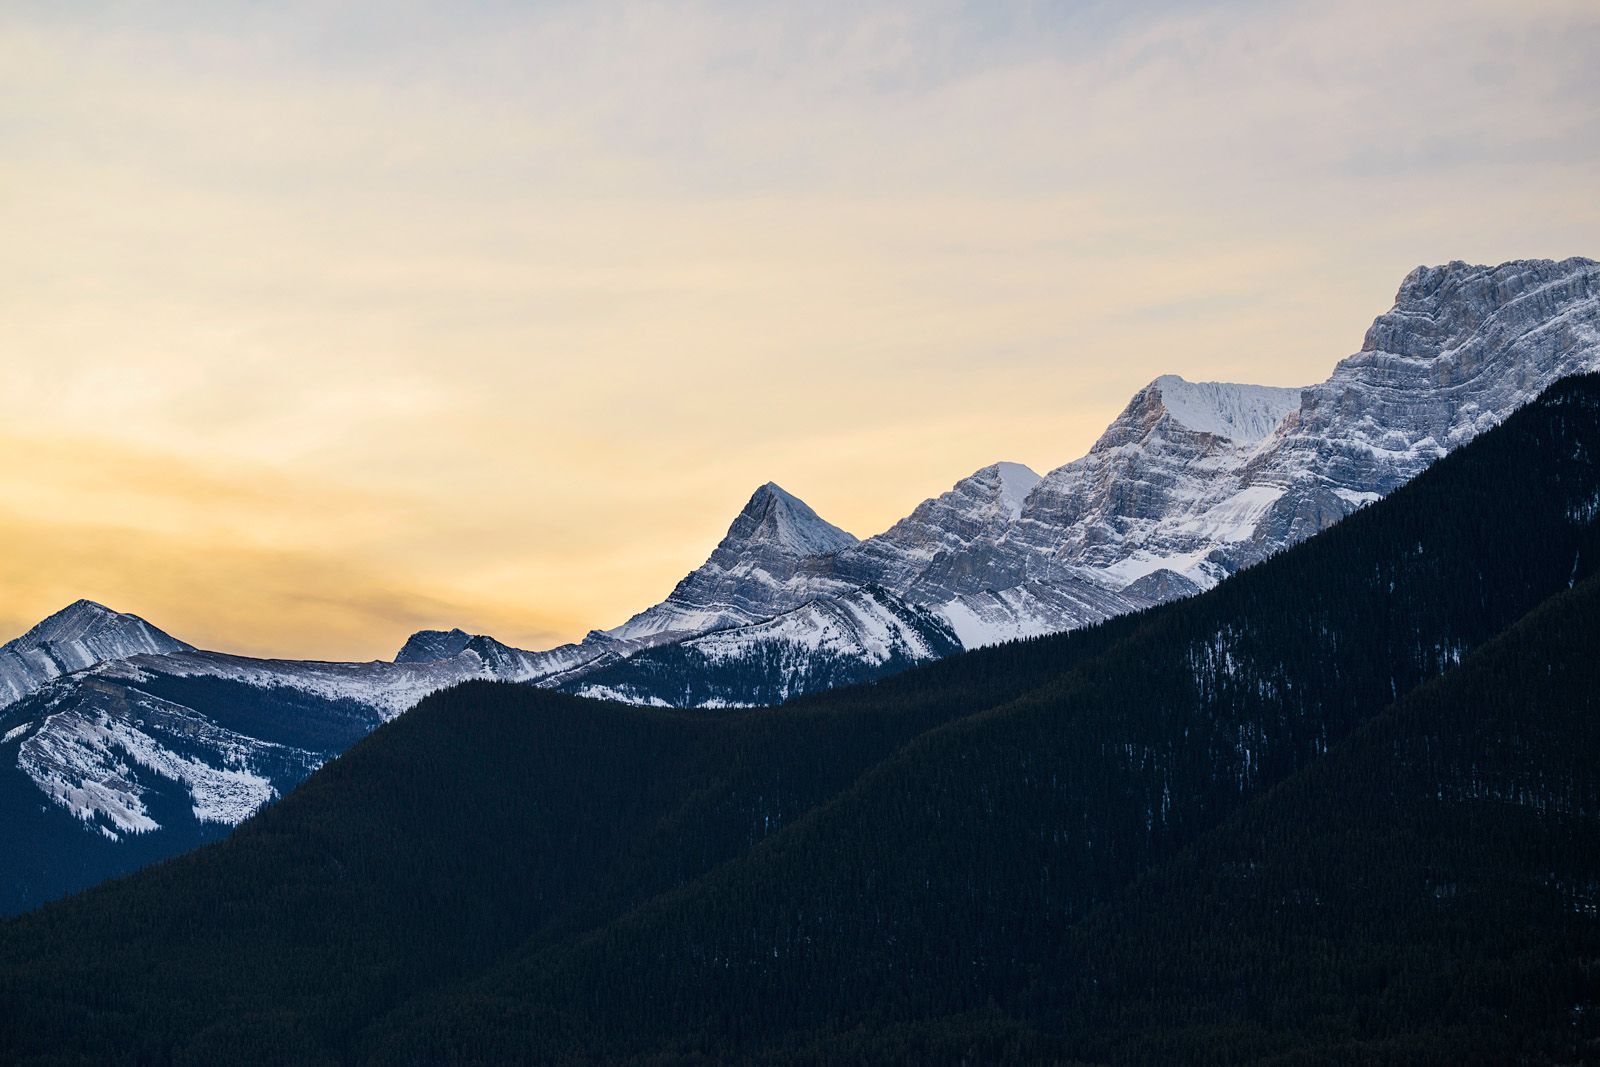 An abstraction view of Three Sisters in Canmore, Alberta, Canada.